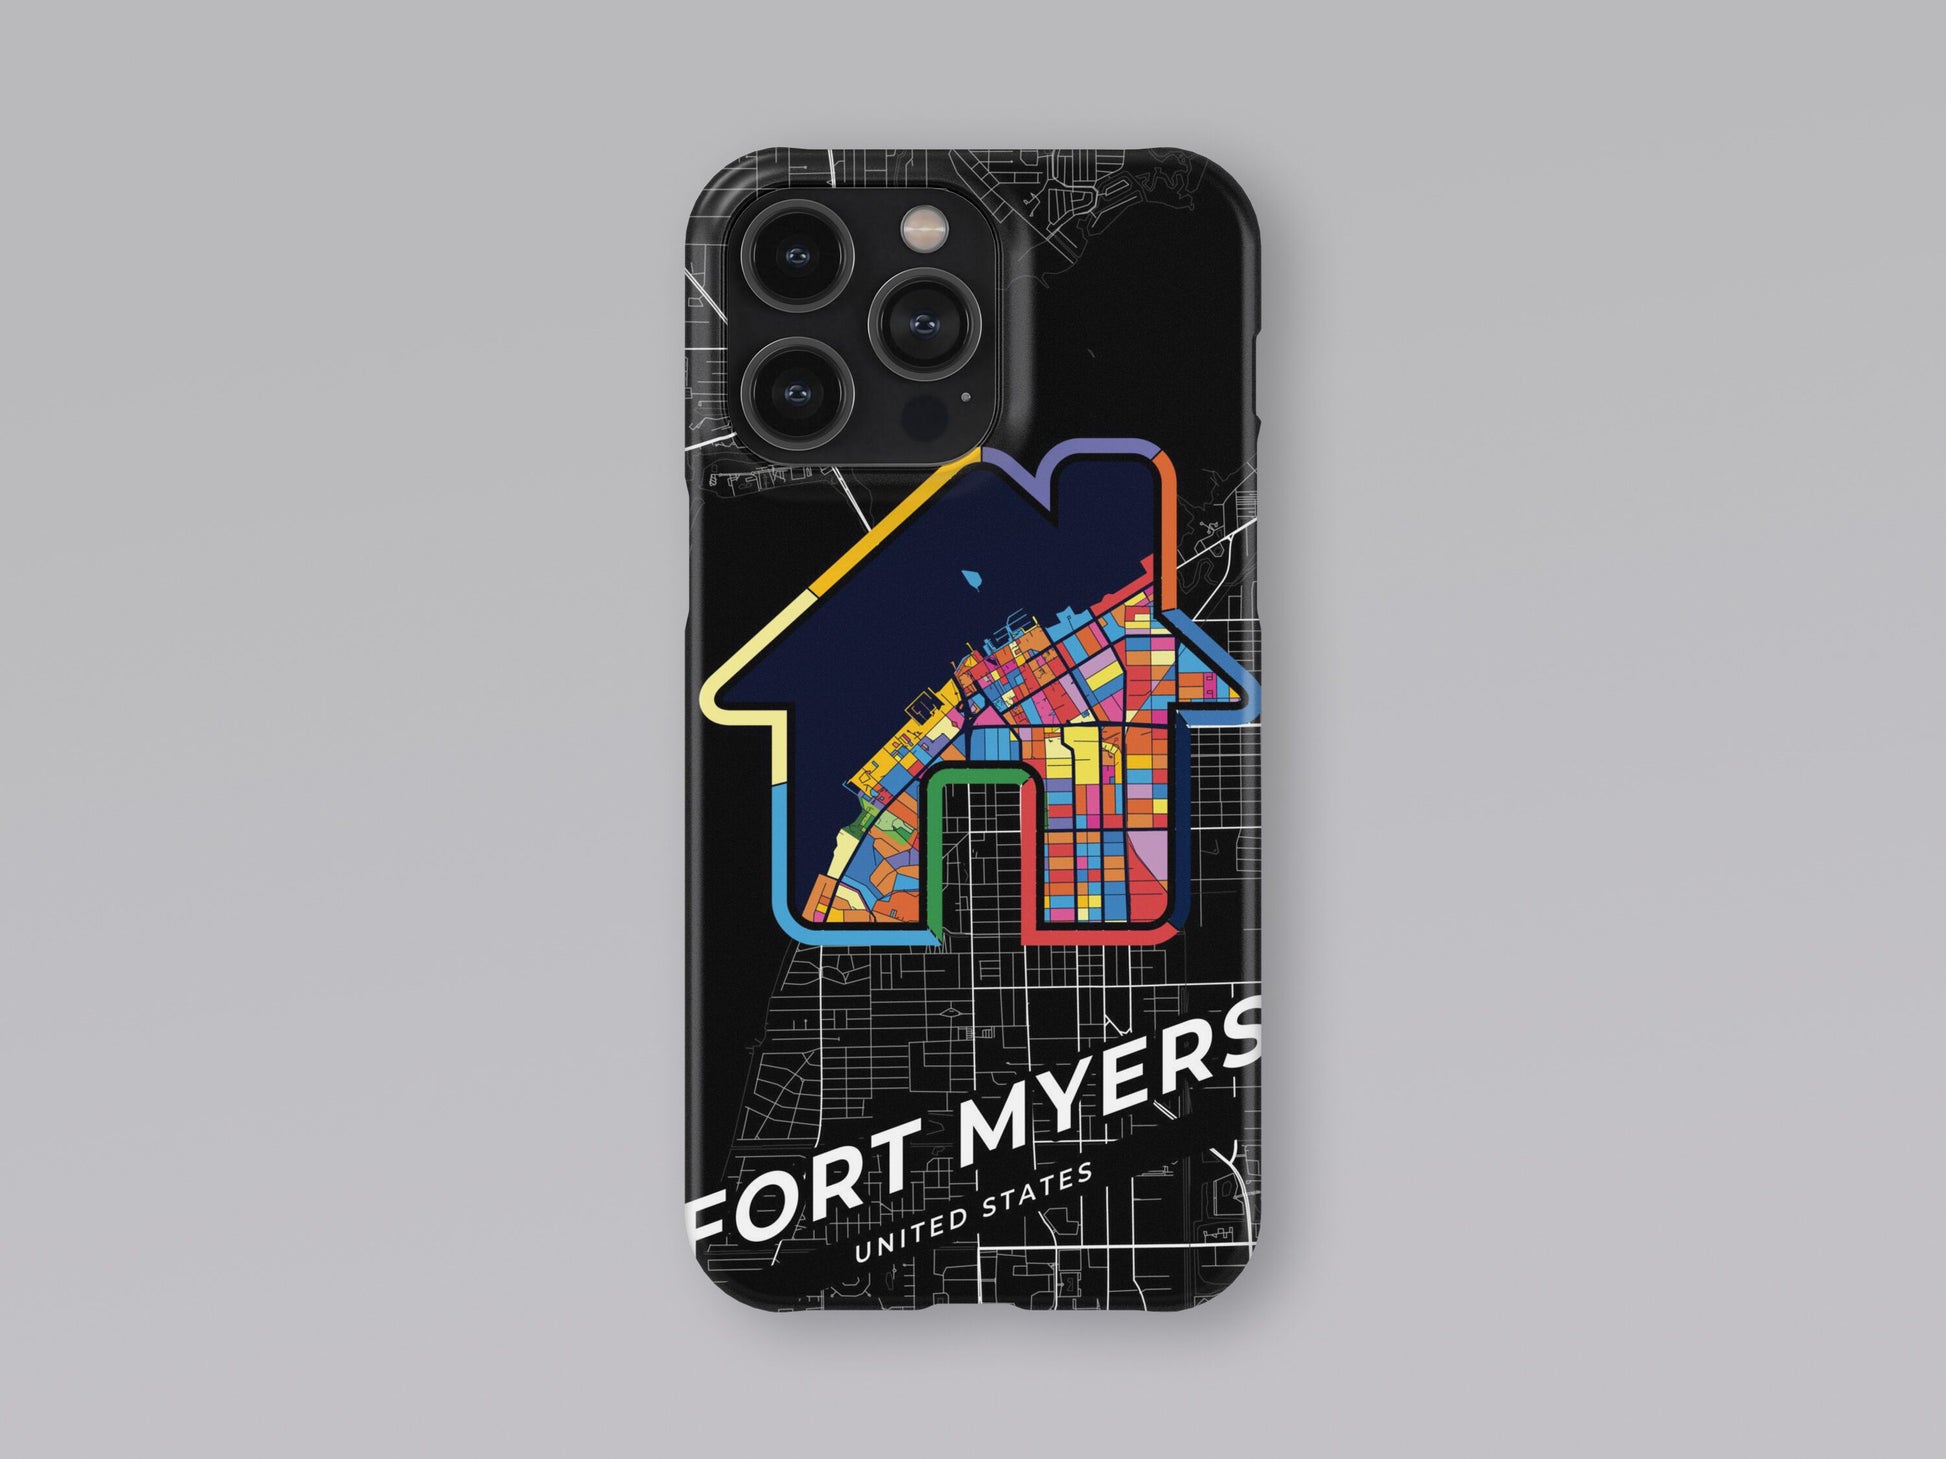 Fort Myers Florida slim phone case with colorful icon. Birthday, wedding or housewarming gift. Couple match cases. 3